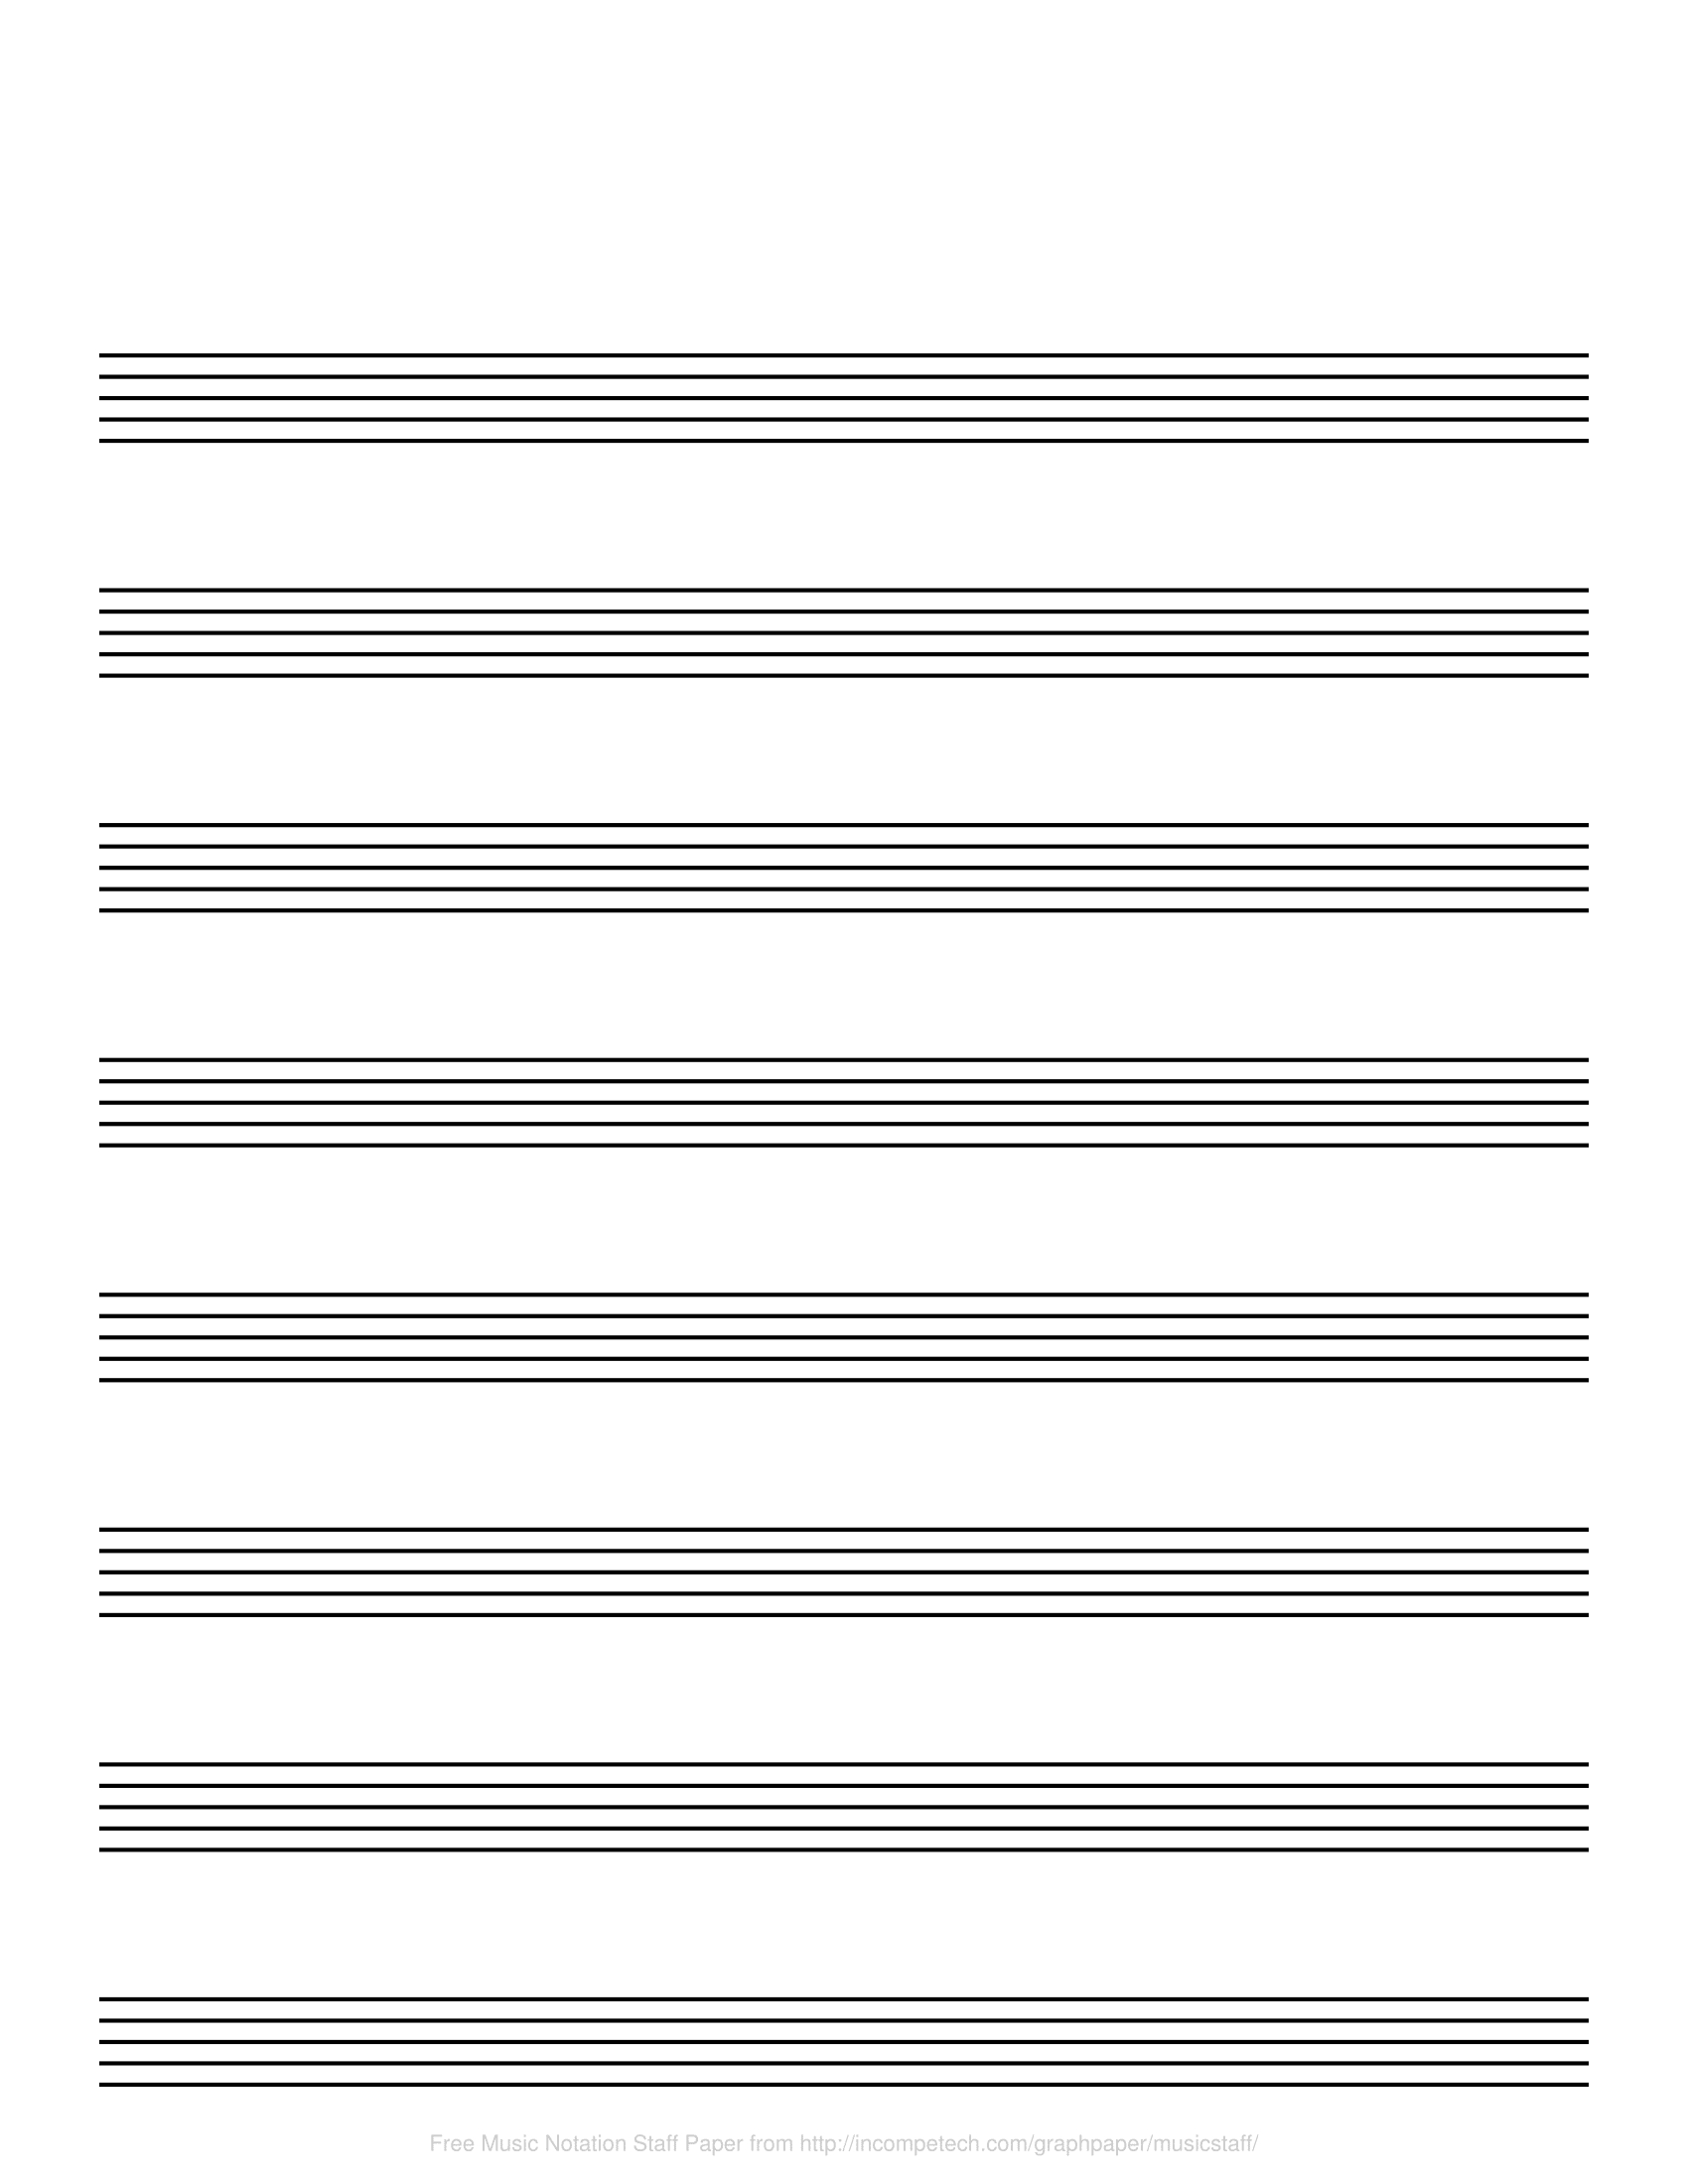 Free Online Graph Paper / Music Notation - Free Printable Music Staff